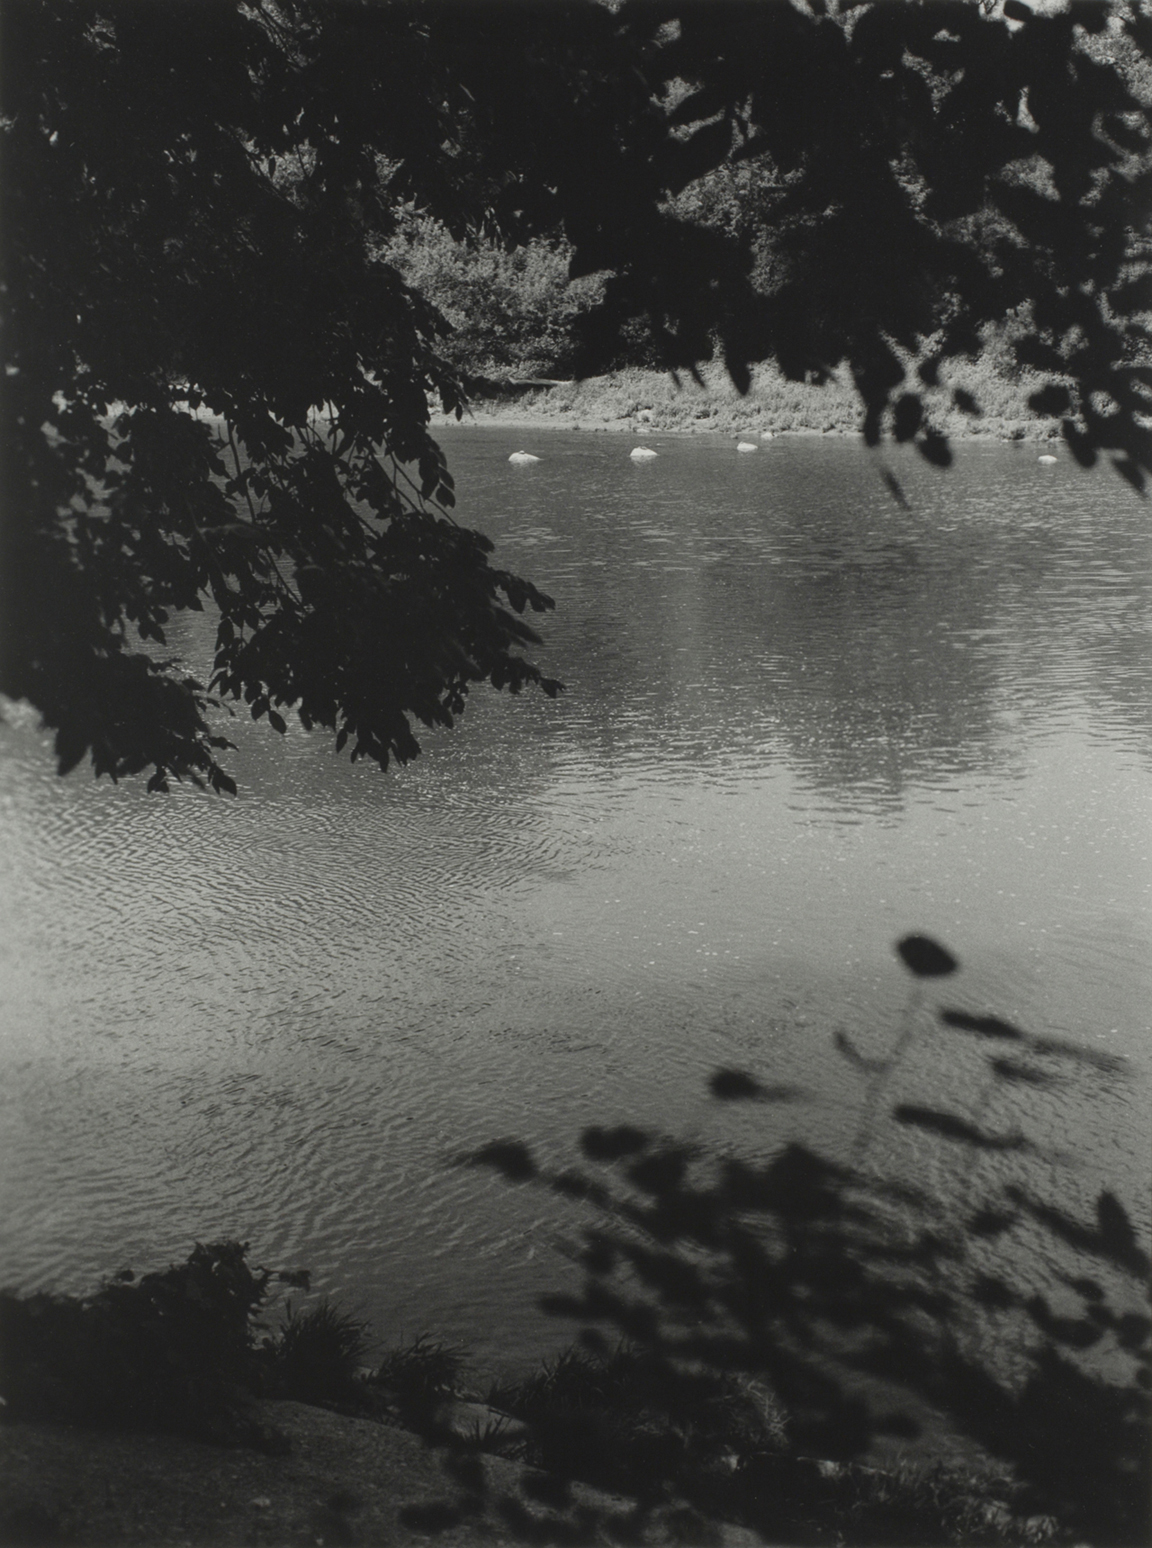 Shelly Niro's Return to Life is a black and white photograph offering a glimpse of the Grand River from beneath a silhouetted tree canopy on a wild shoreline